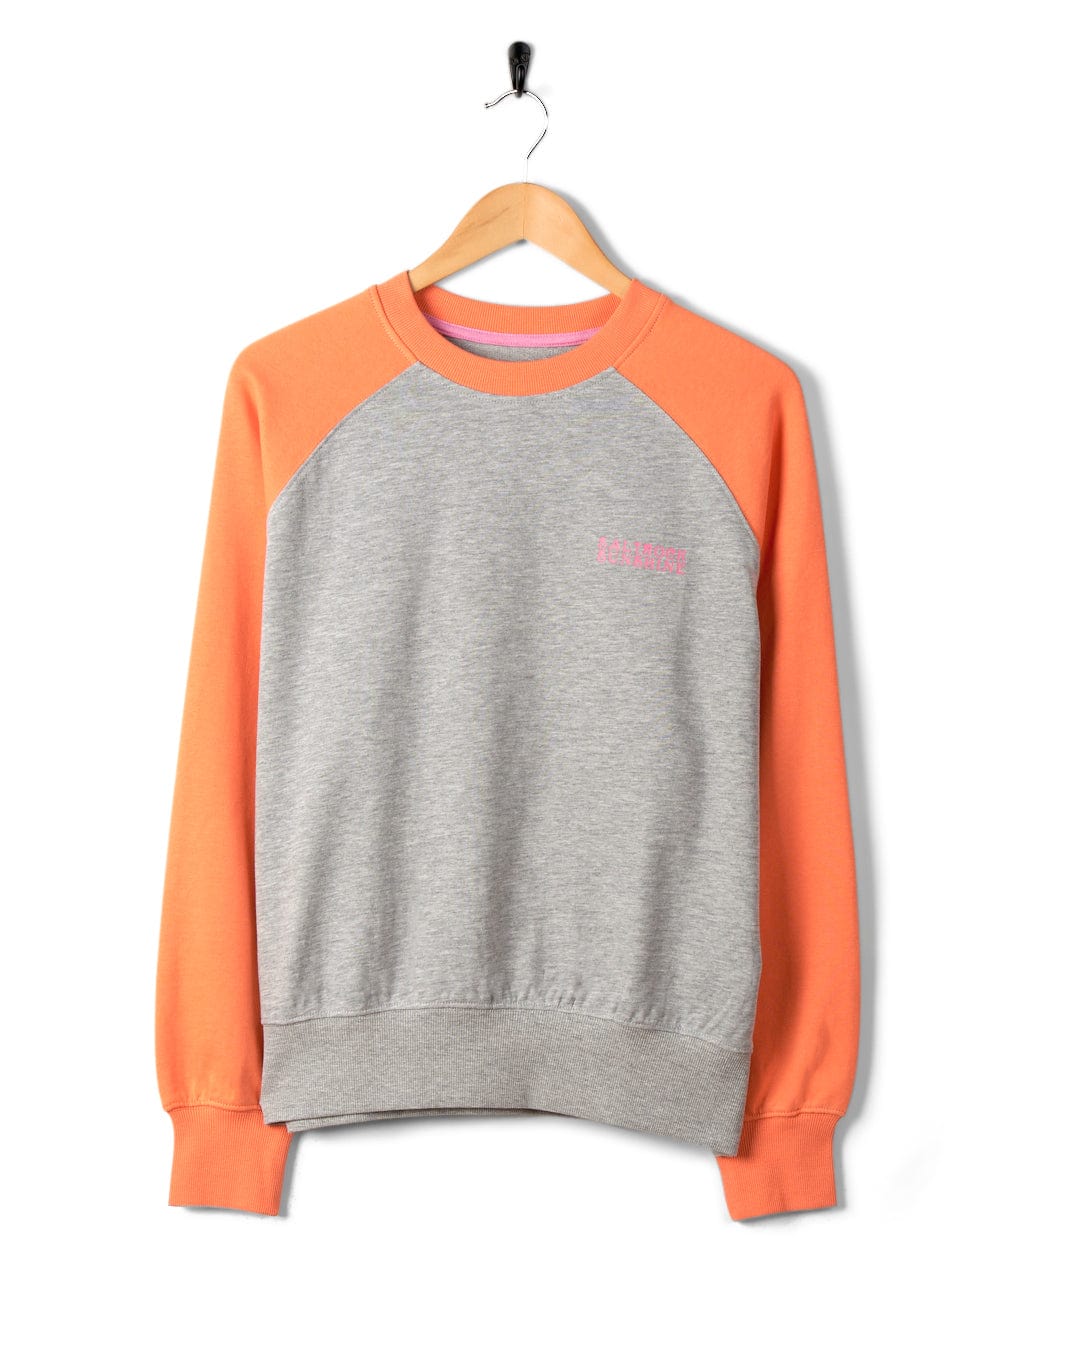 Gray and orange crew neck sweatshirt with raglan sleeves and the word "SALTROCK" embroidered in pink, hanging on a black hanger against a white background.